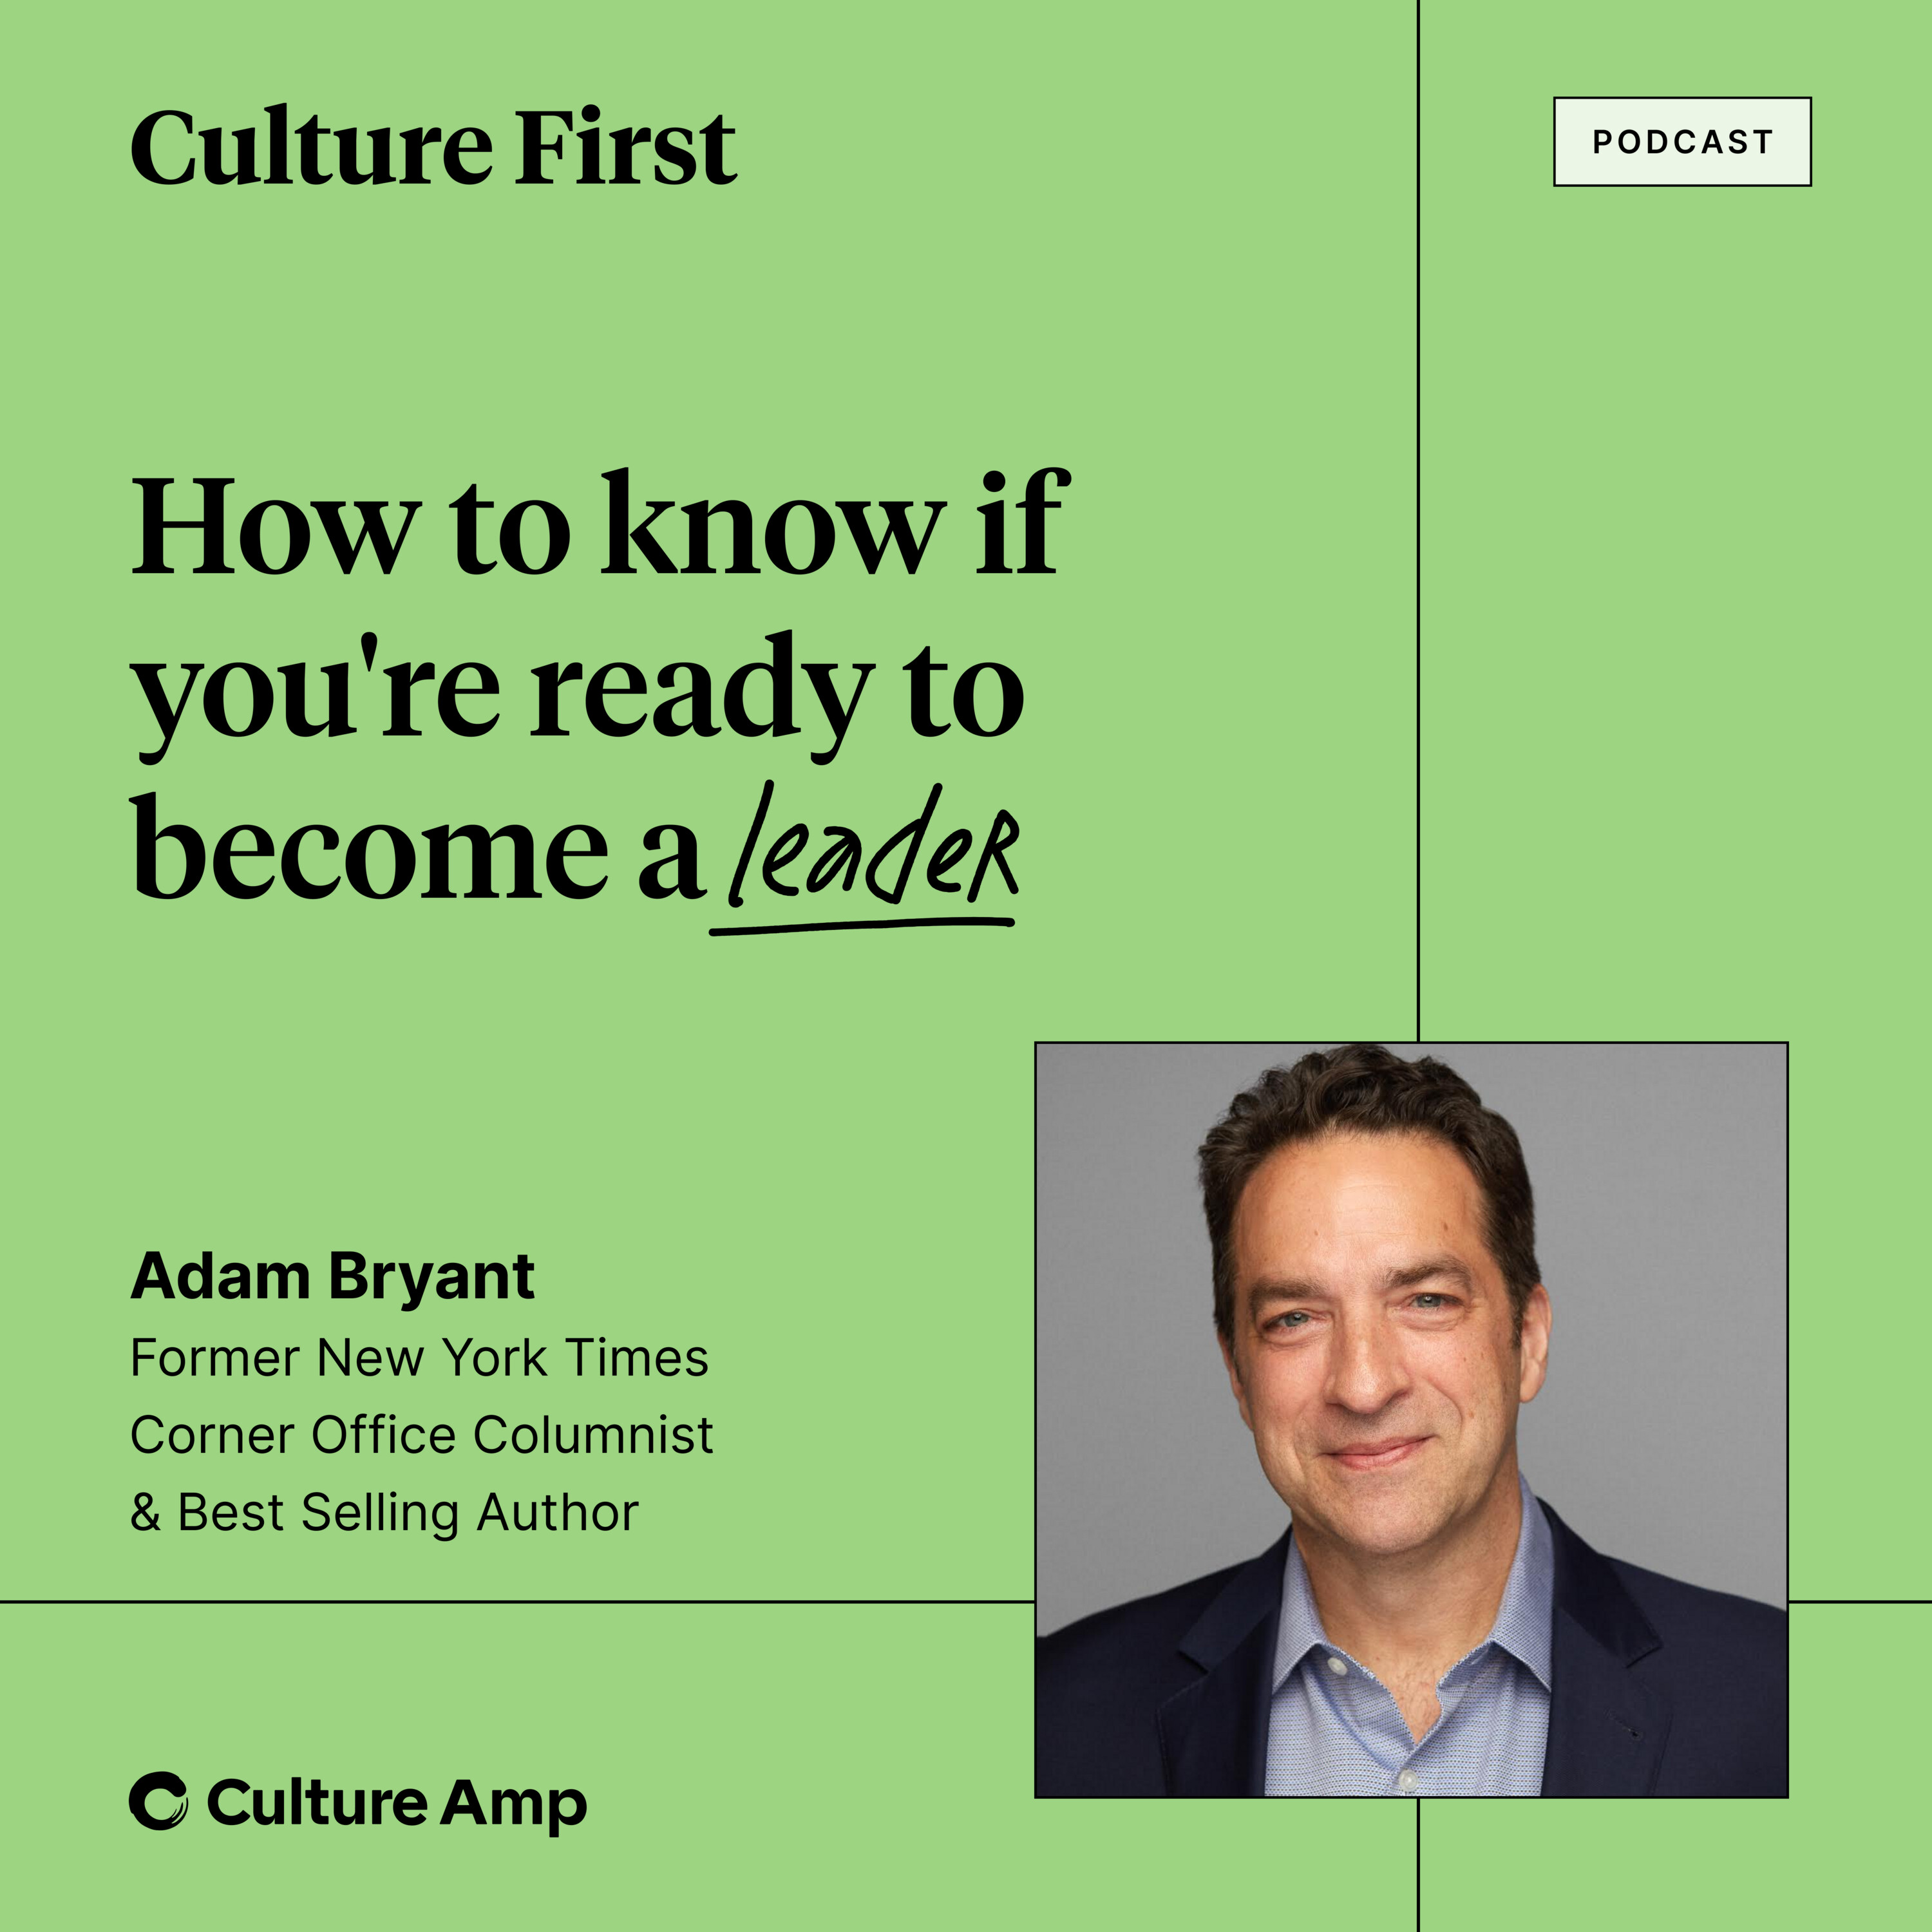 Adam Bryant on how to know if you're ready to become a leader. 